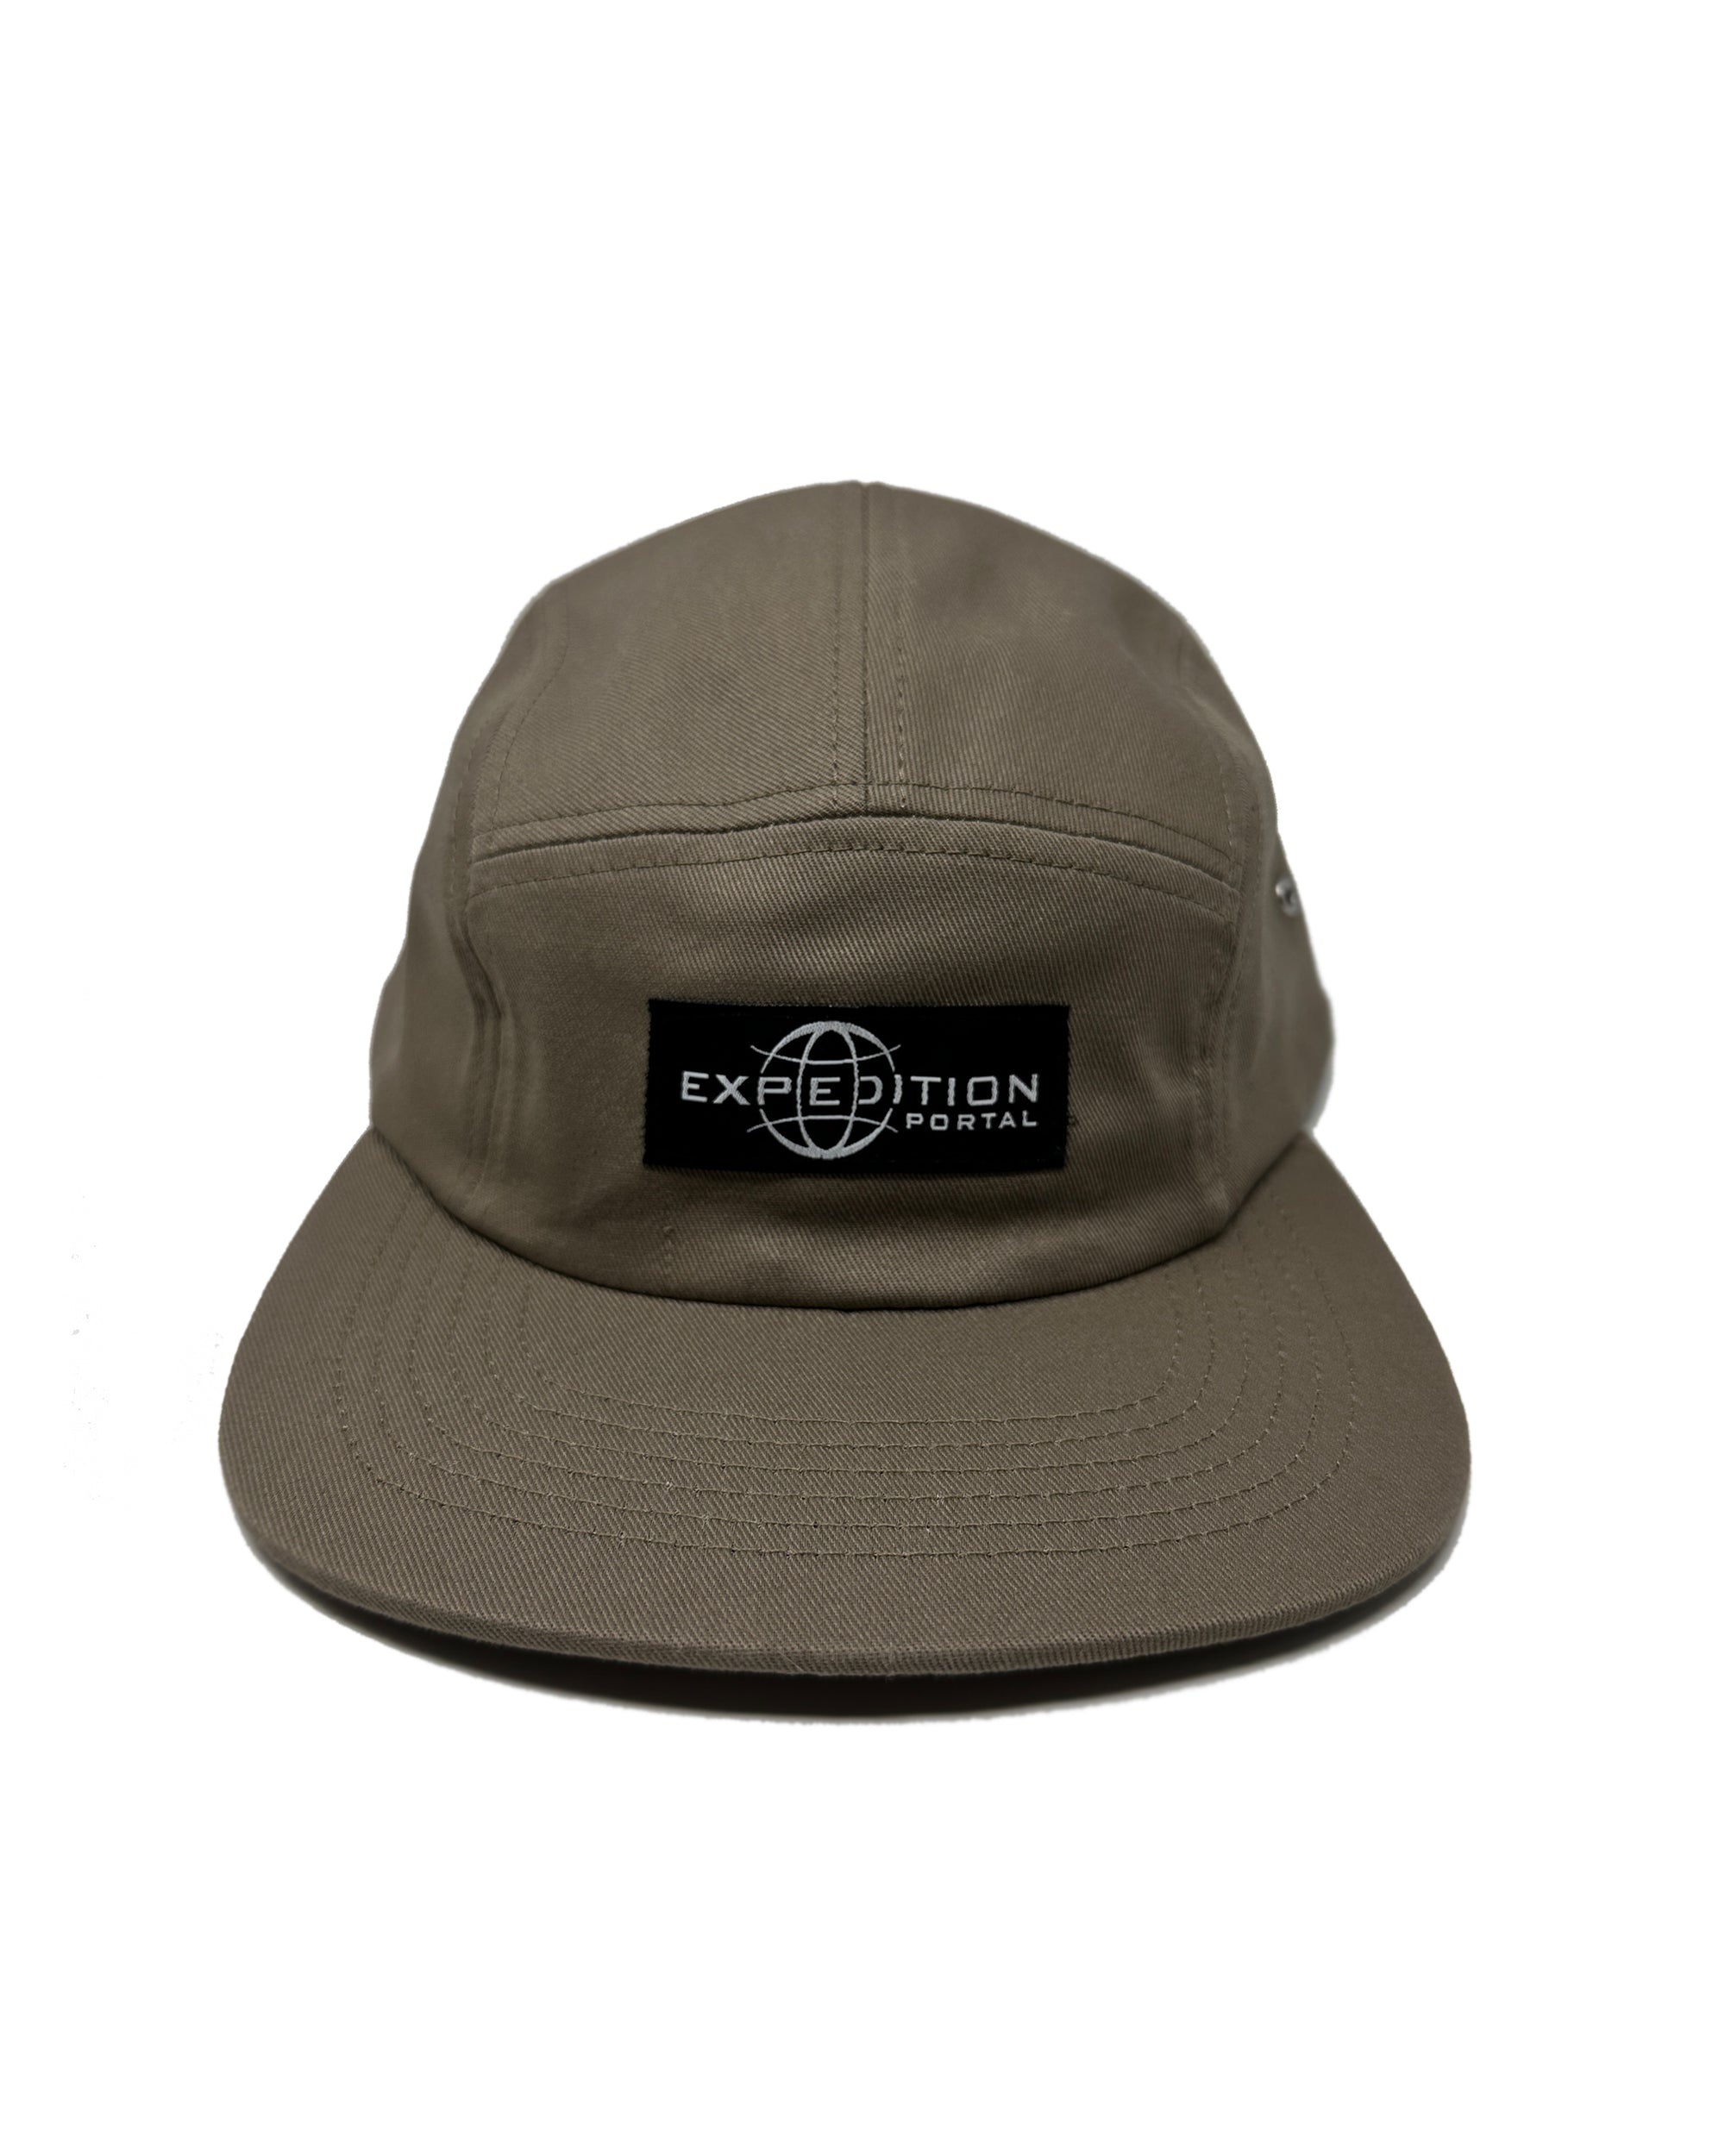 Expedition Portal 5-Panel Hat